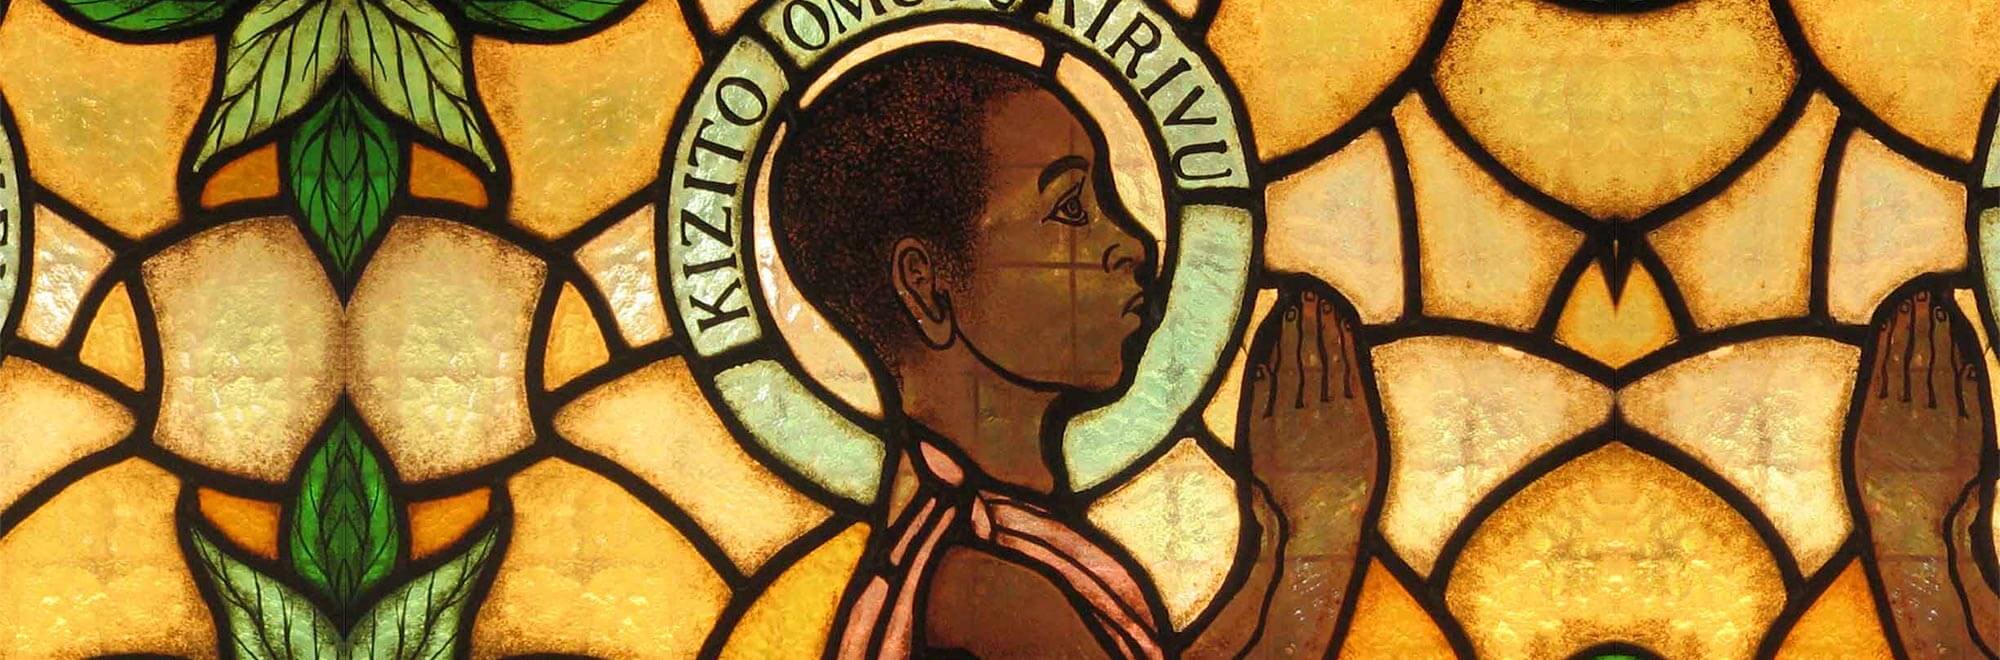 st. kizito portrait in a stained glass window